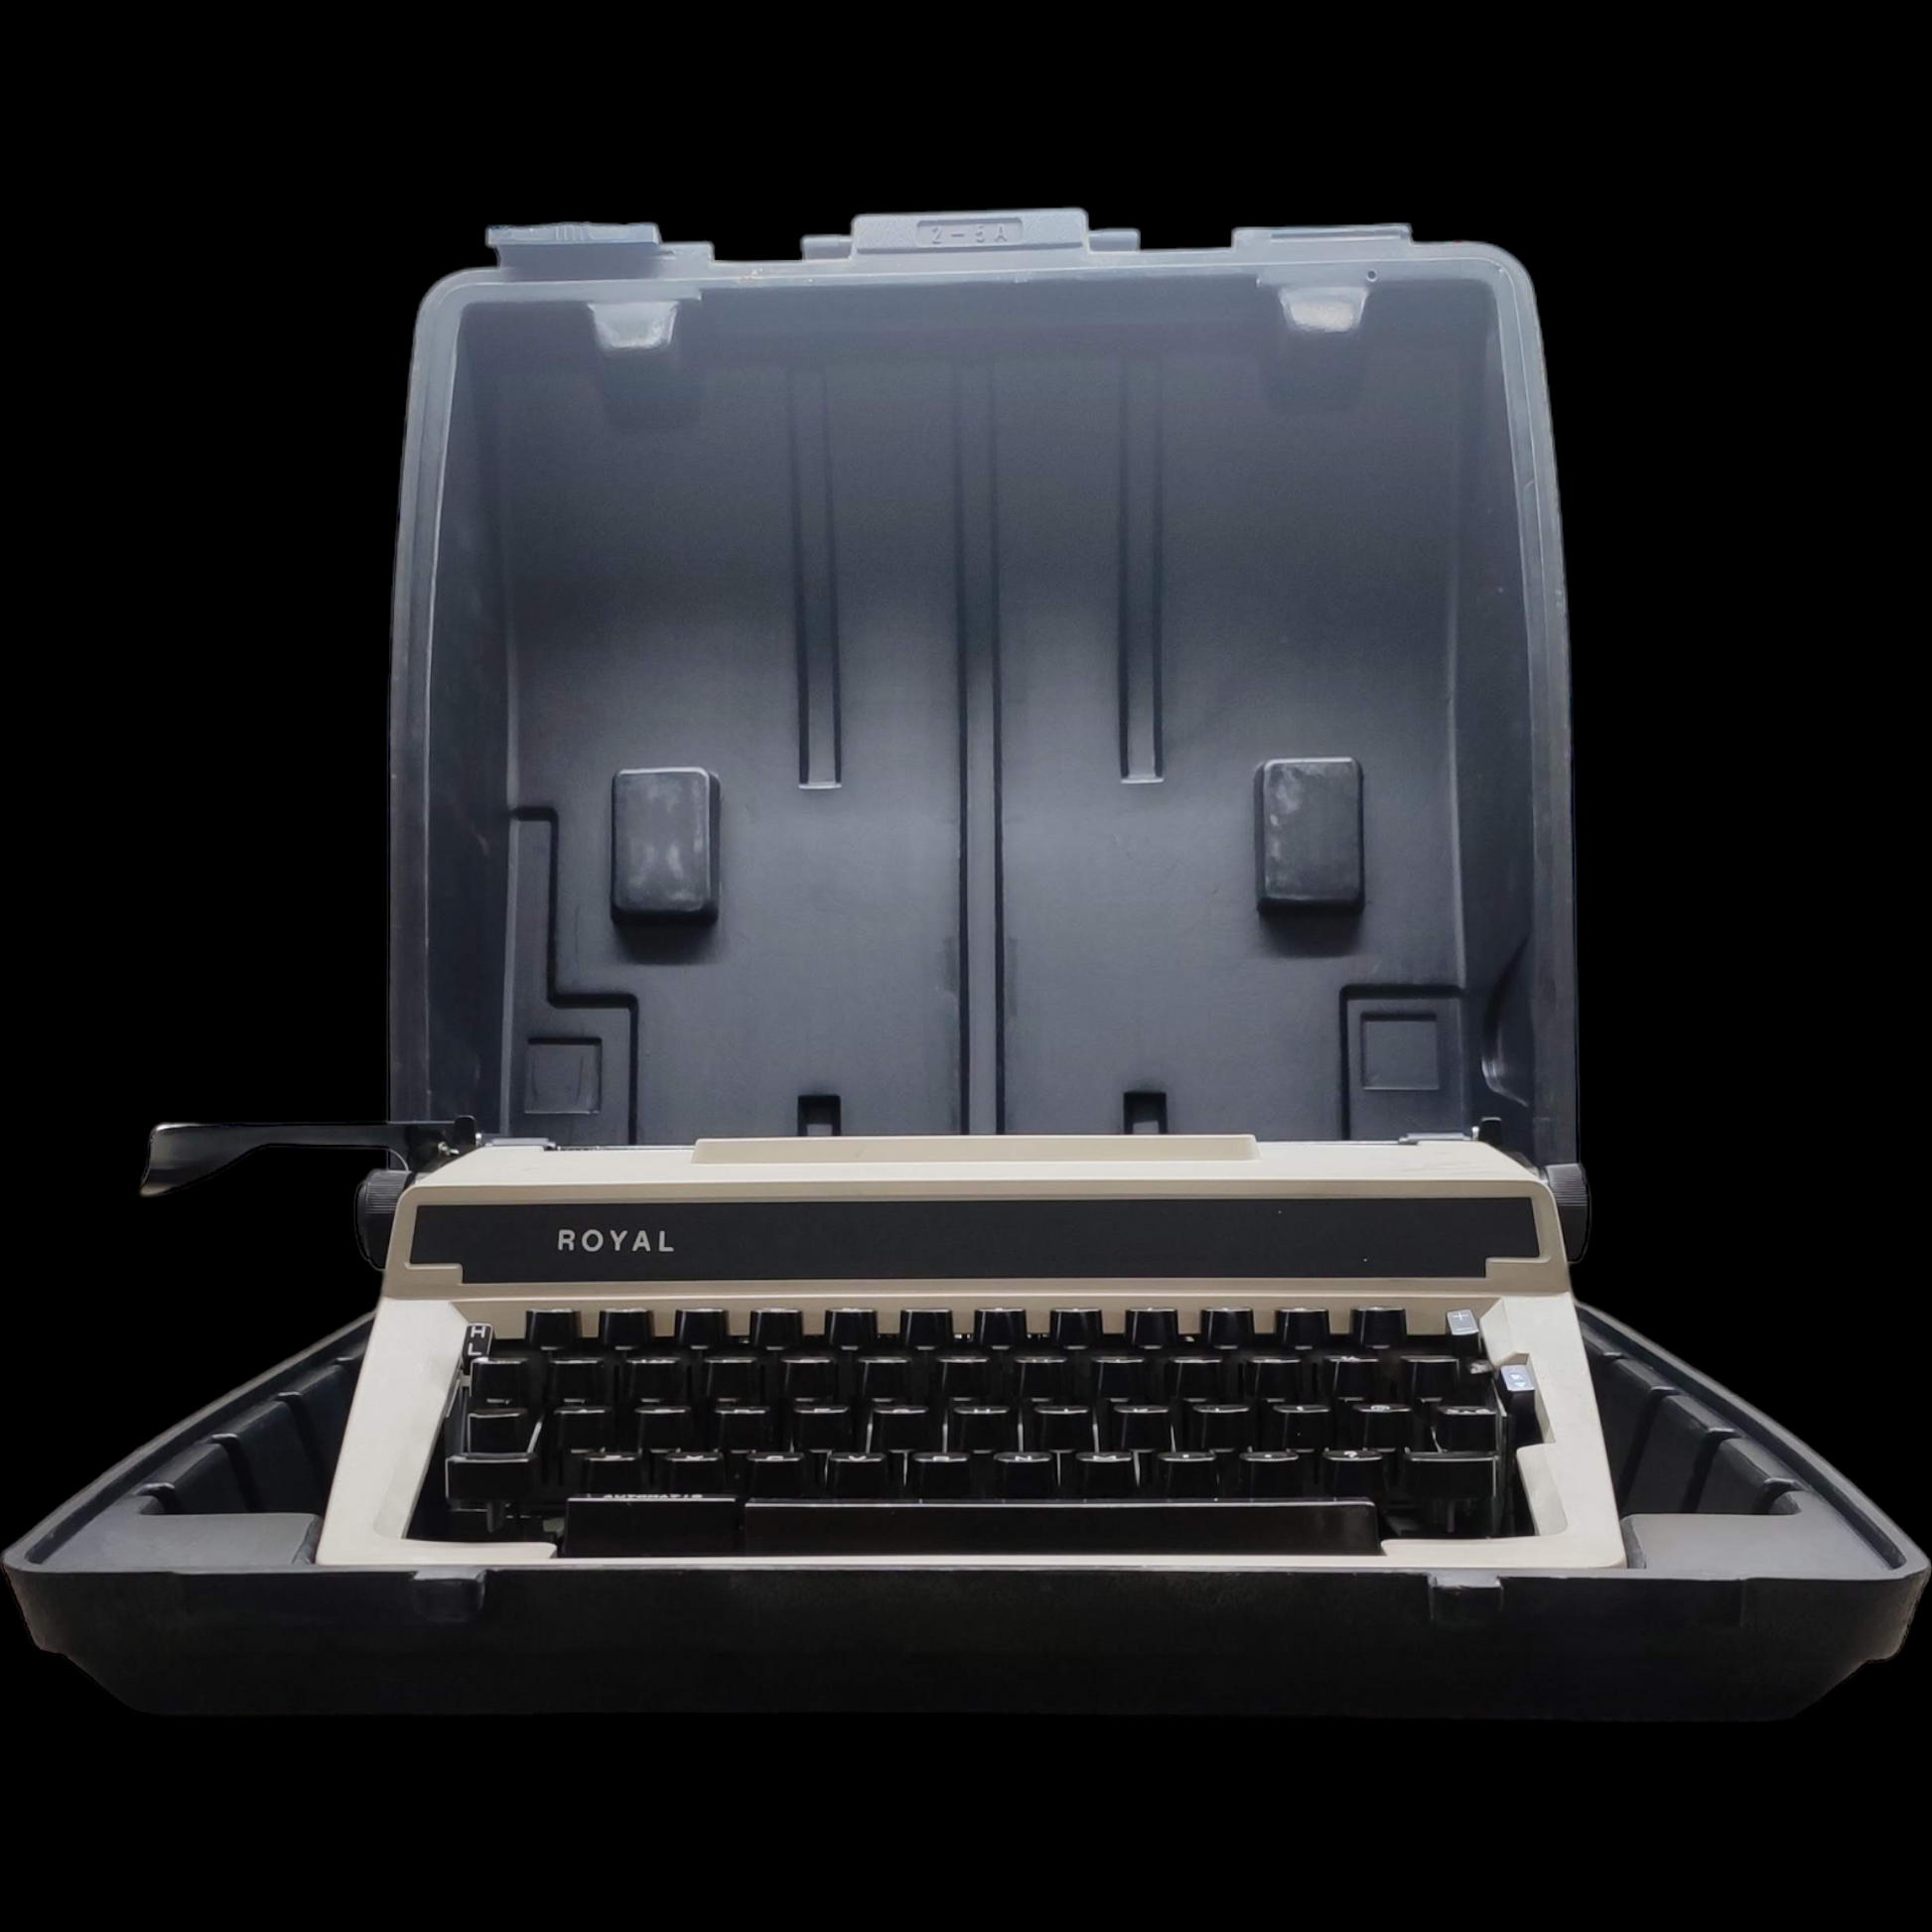 Image of Royal Express 12 Typewriter. Available from universaltypewritercompany.in